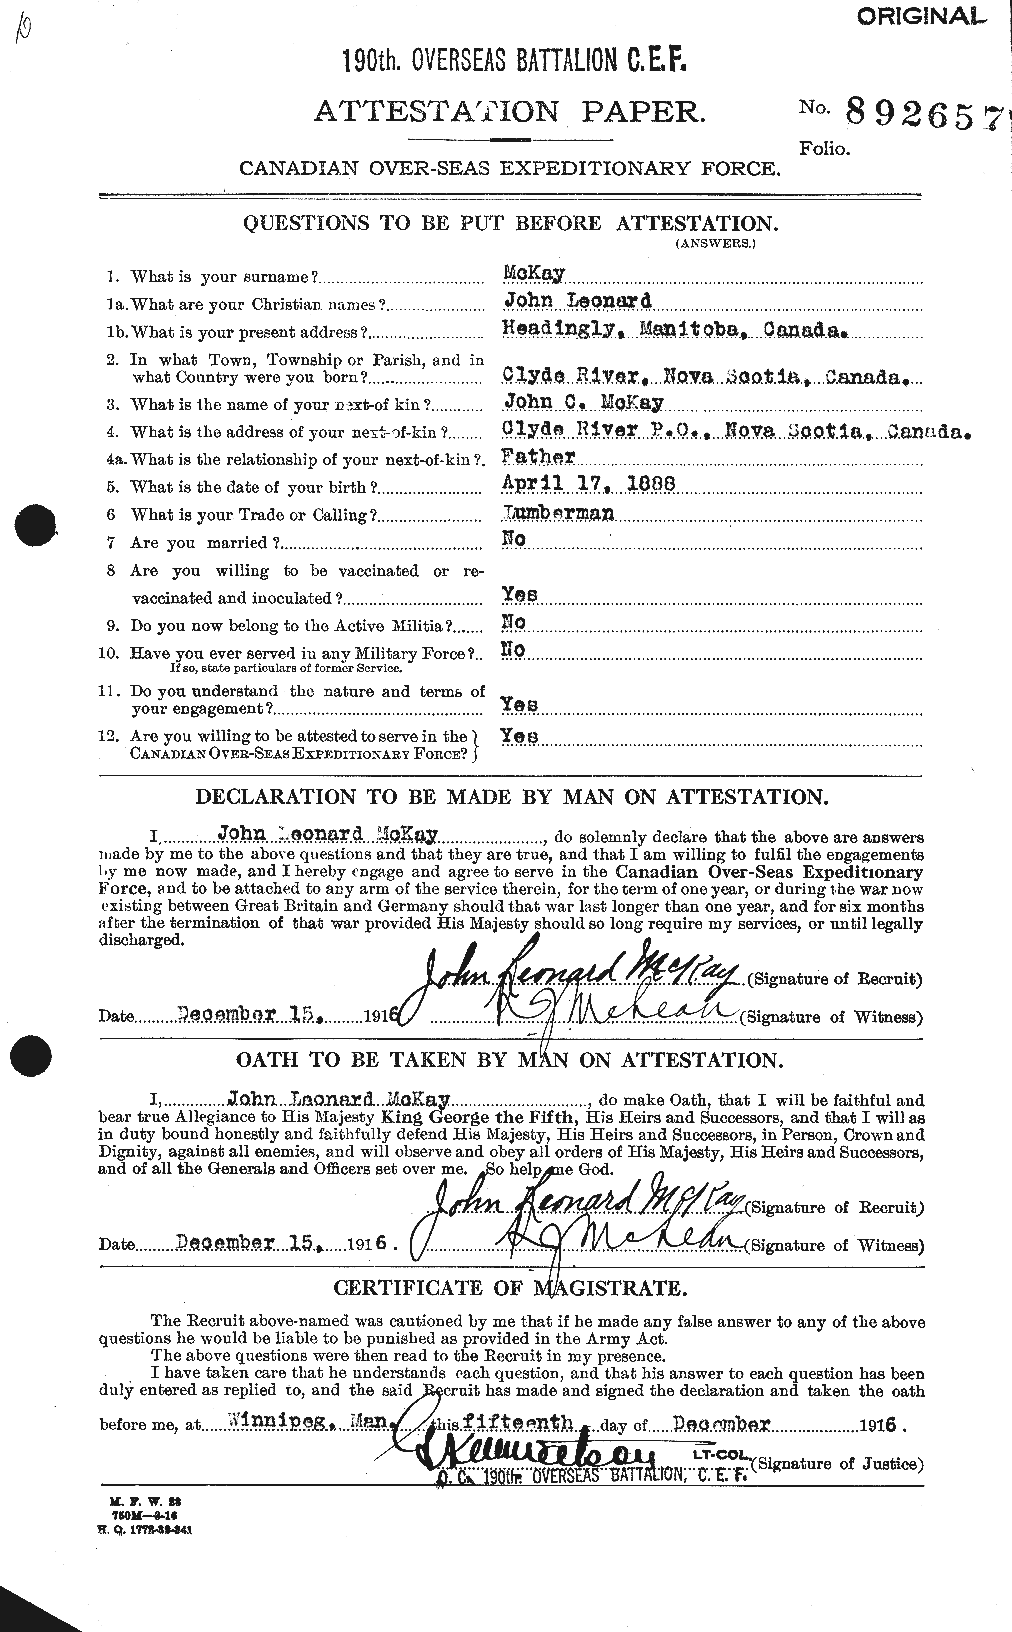 Personnel Records of the First World War - CEF 527075a